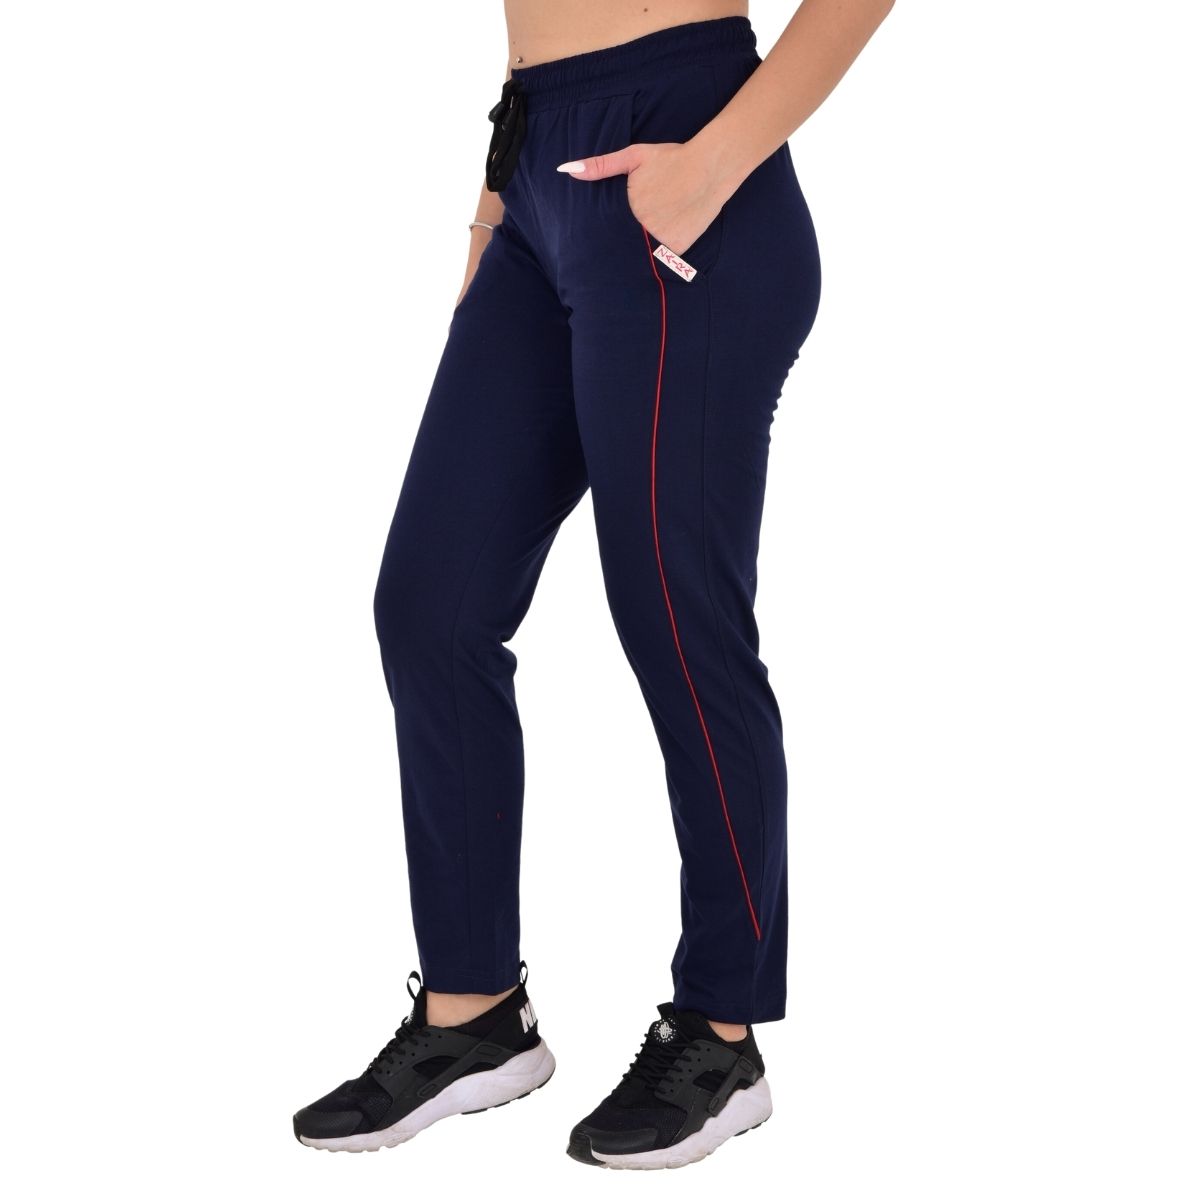 Buy Premium Women Track pants | Original | Very Comfortable | Perfect Fit |  Stylish | Good Quality Pack of 2 Online In India At Discounted Prices